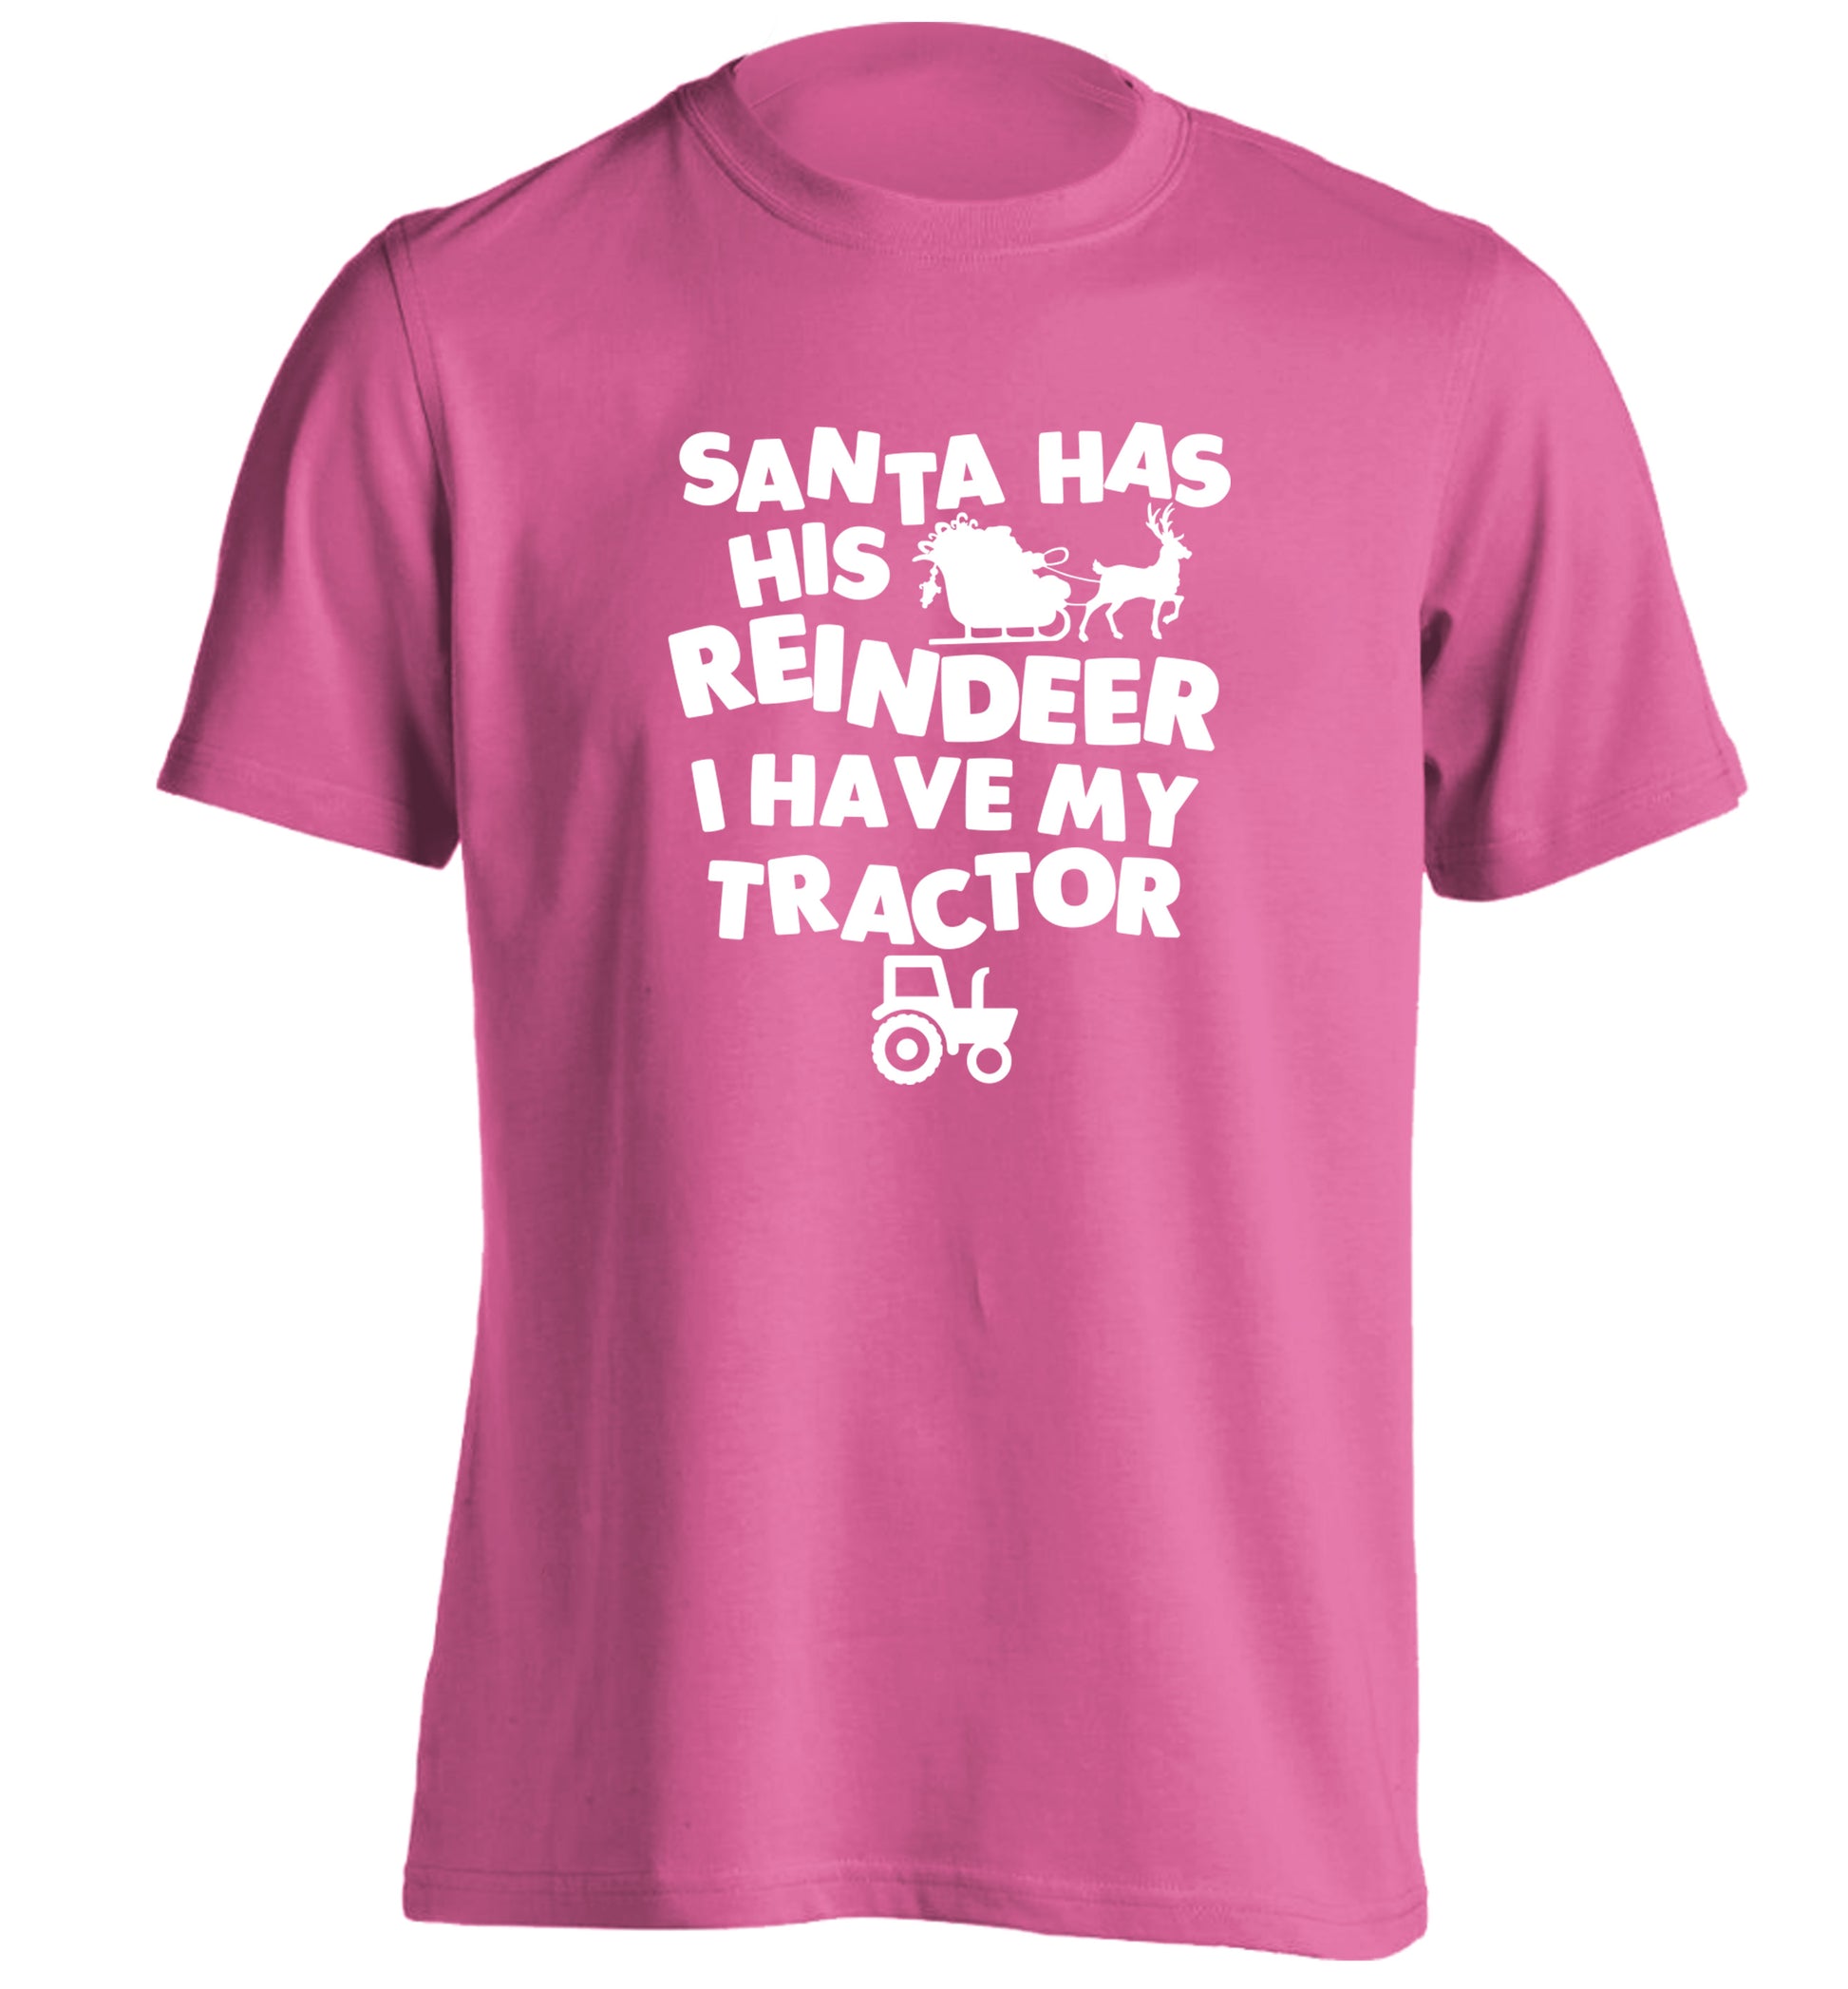 Santa has his reindeer I have my tractor adults unisex pink Tshirt 2XL